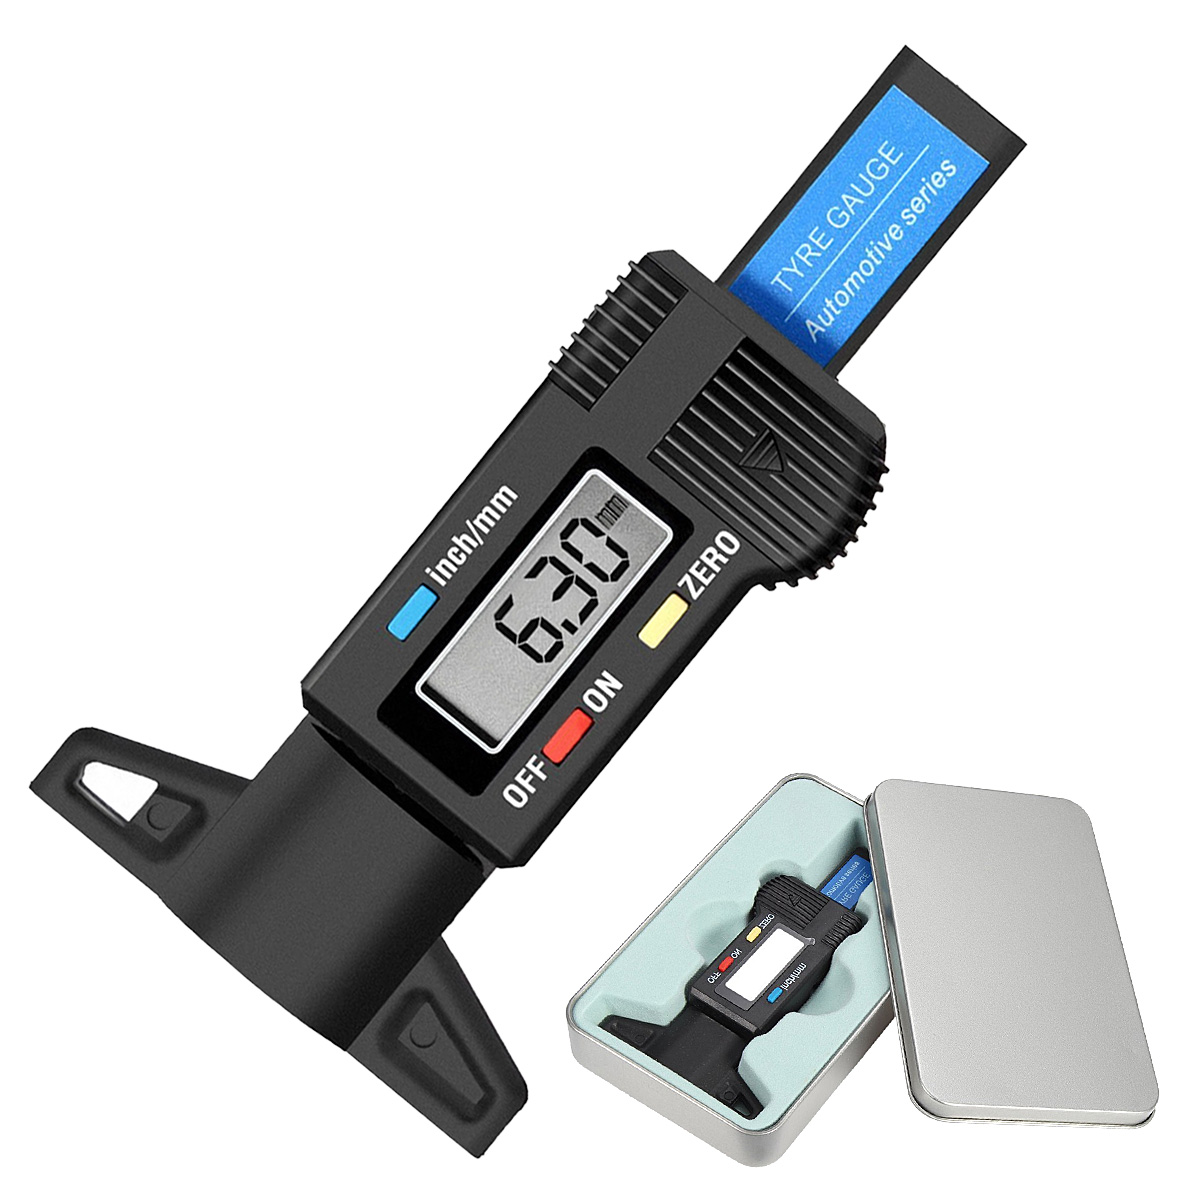 Tyre Depth Measurement with LCD Display for Cars ershixiong Digital Tyre Tread Depth Gauge SUV and Trucks. Protable Tyre Depth Gauge 0-25mm/1 Inch Tyre Tread Depth Checker 